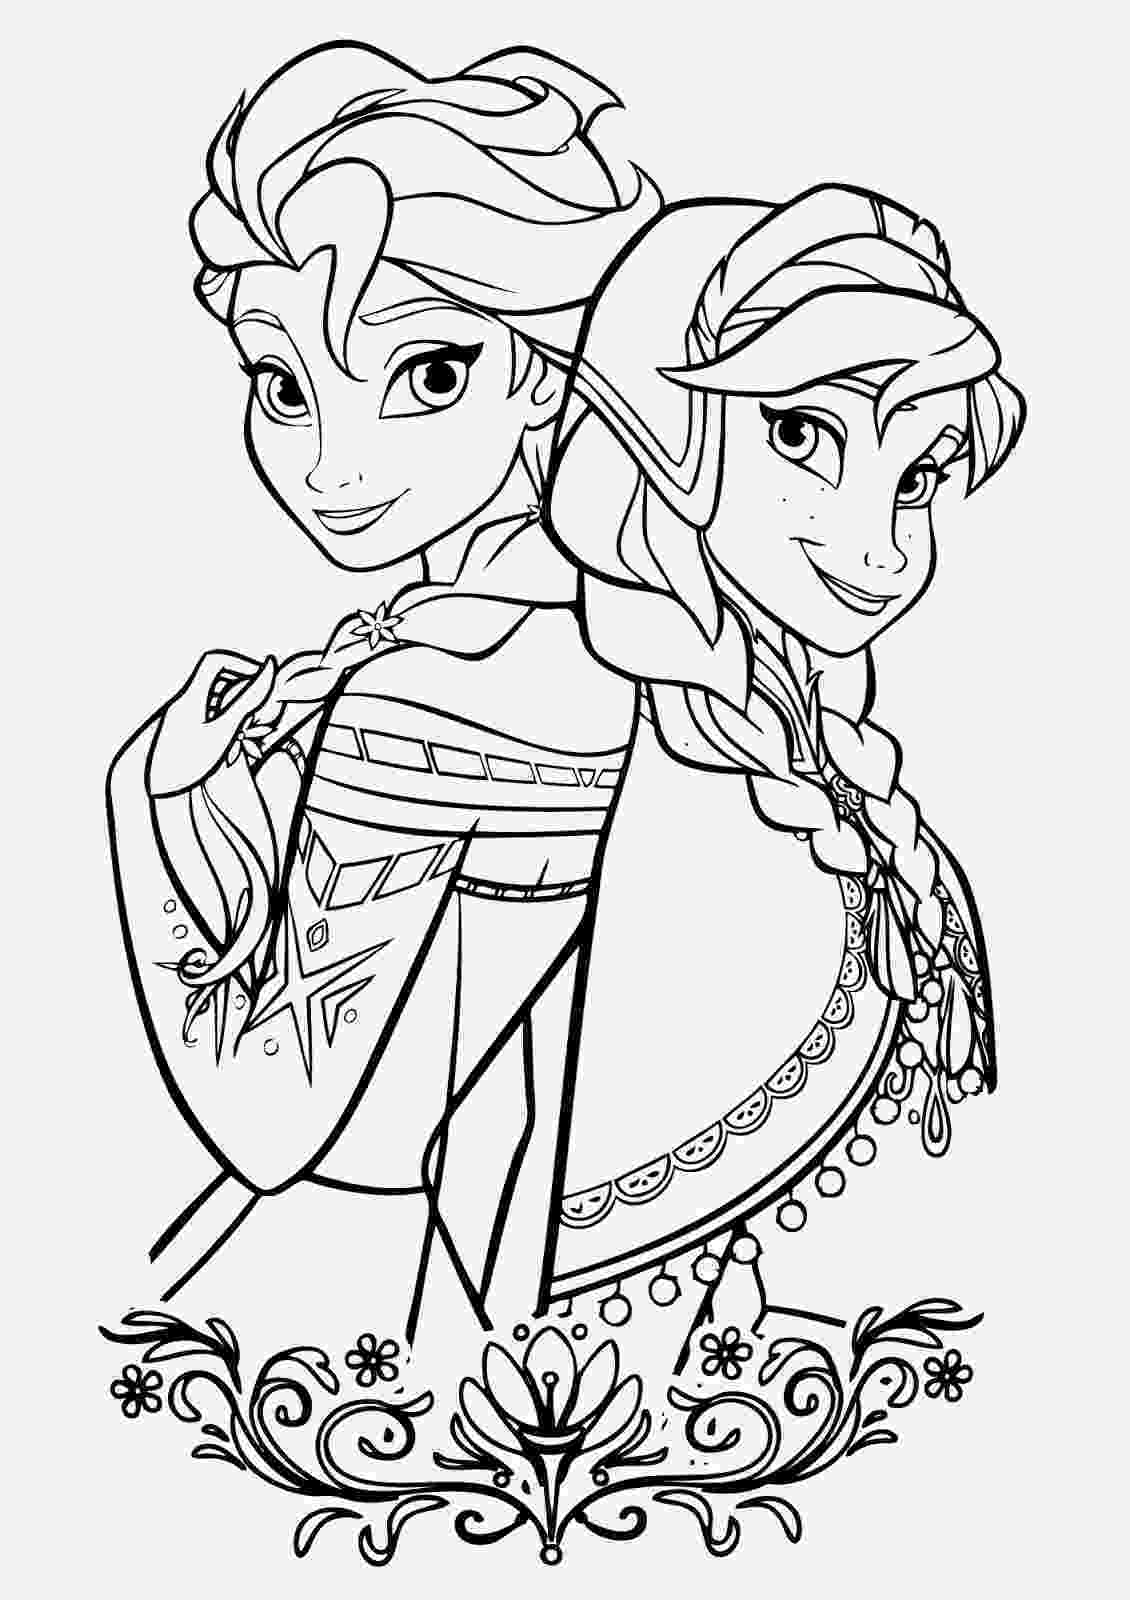 frozen printable colouring pages 15 beautiful disney frozen coloring pages free instant colouring printable pages frozen 